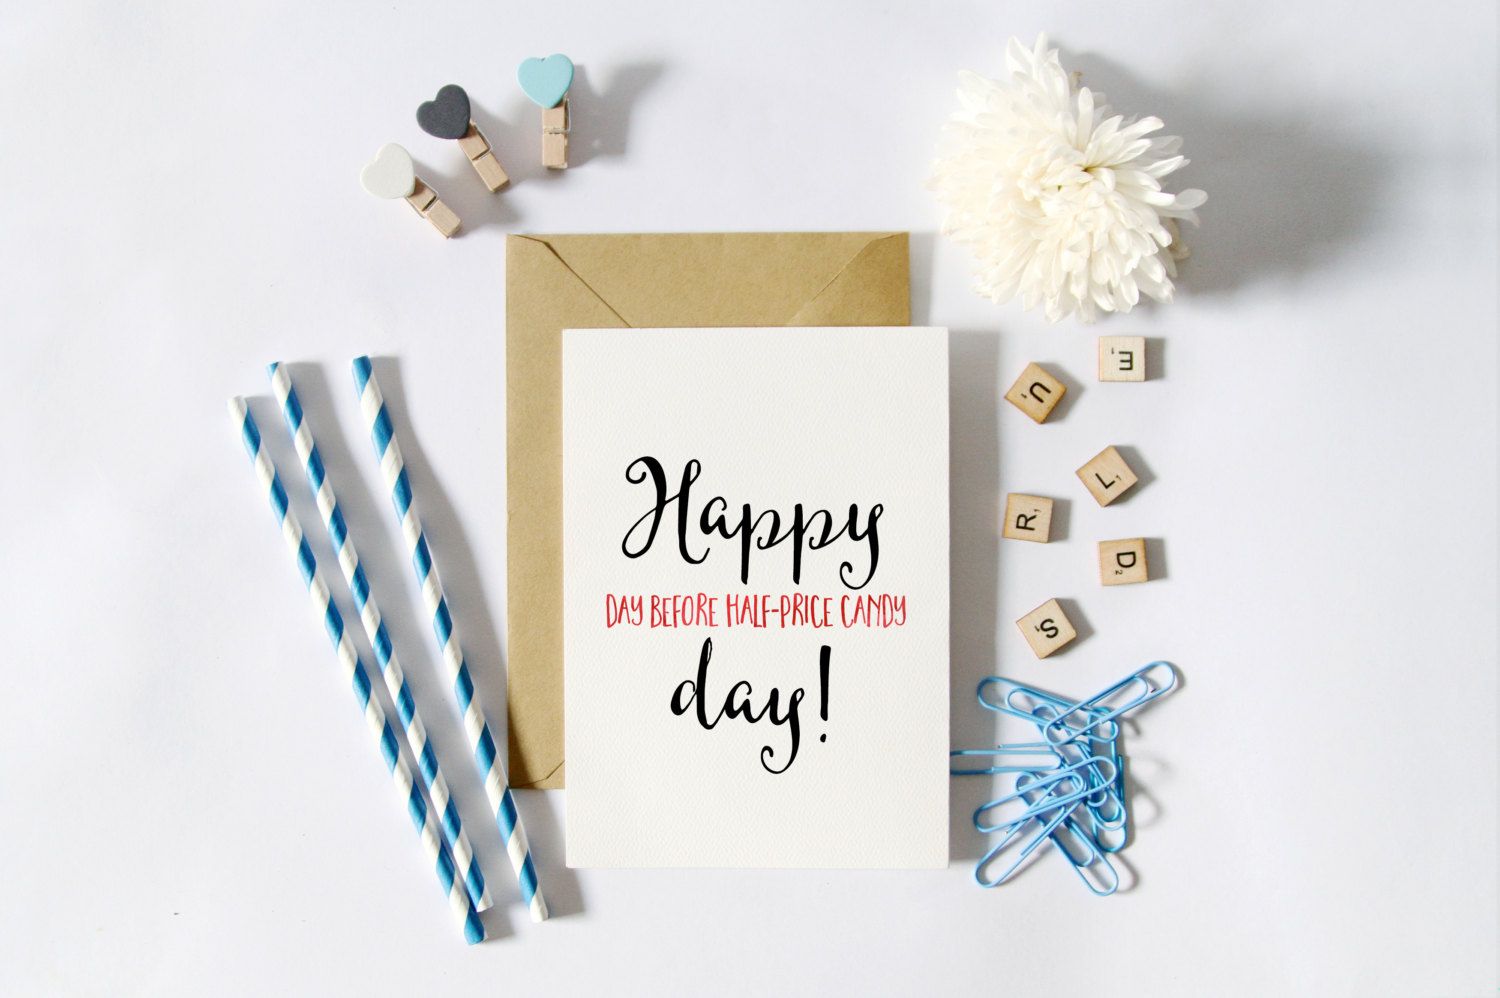 Funny Valentine's Cards: Happy day before Half-Priced Candy Day!